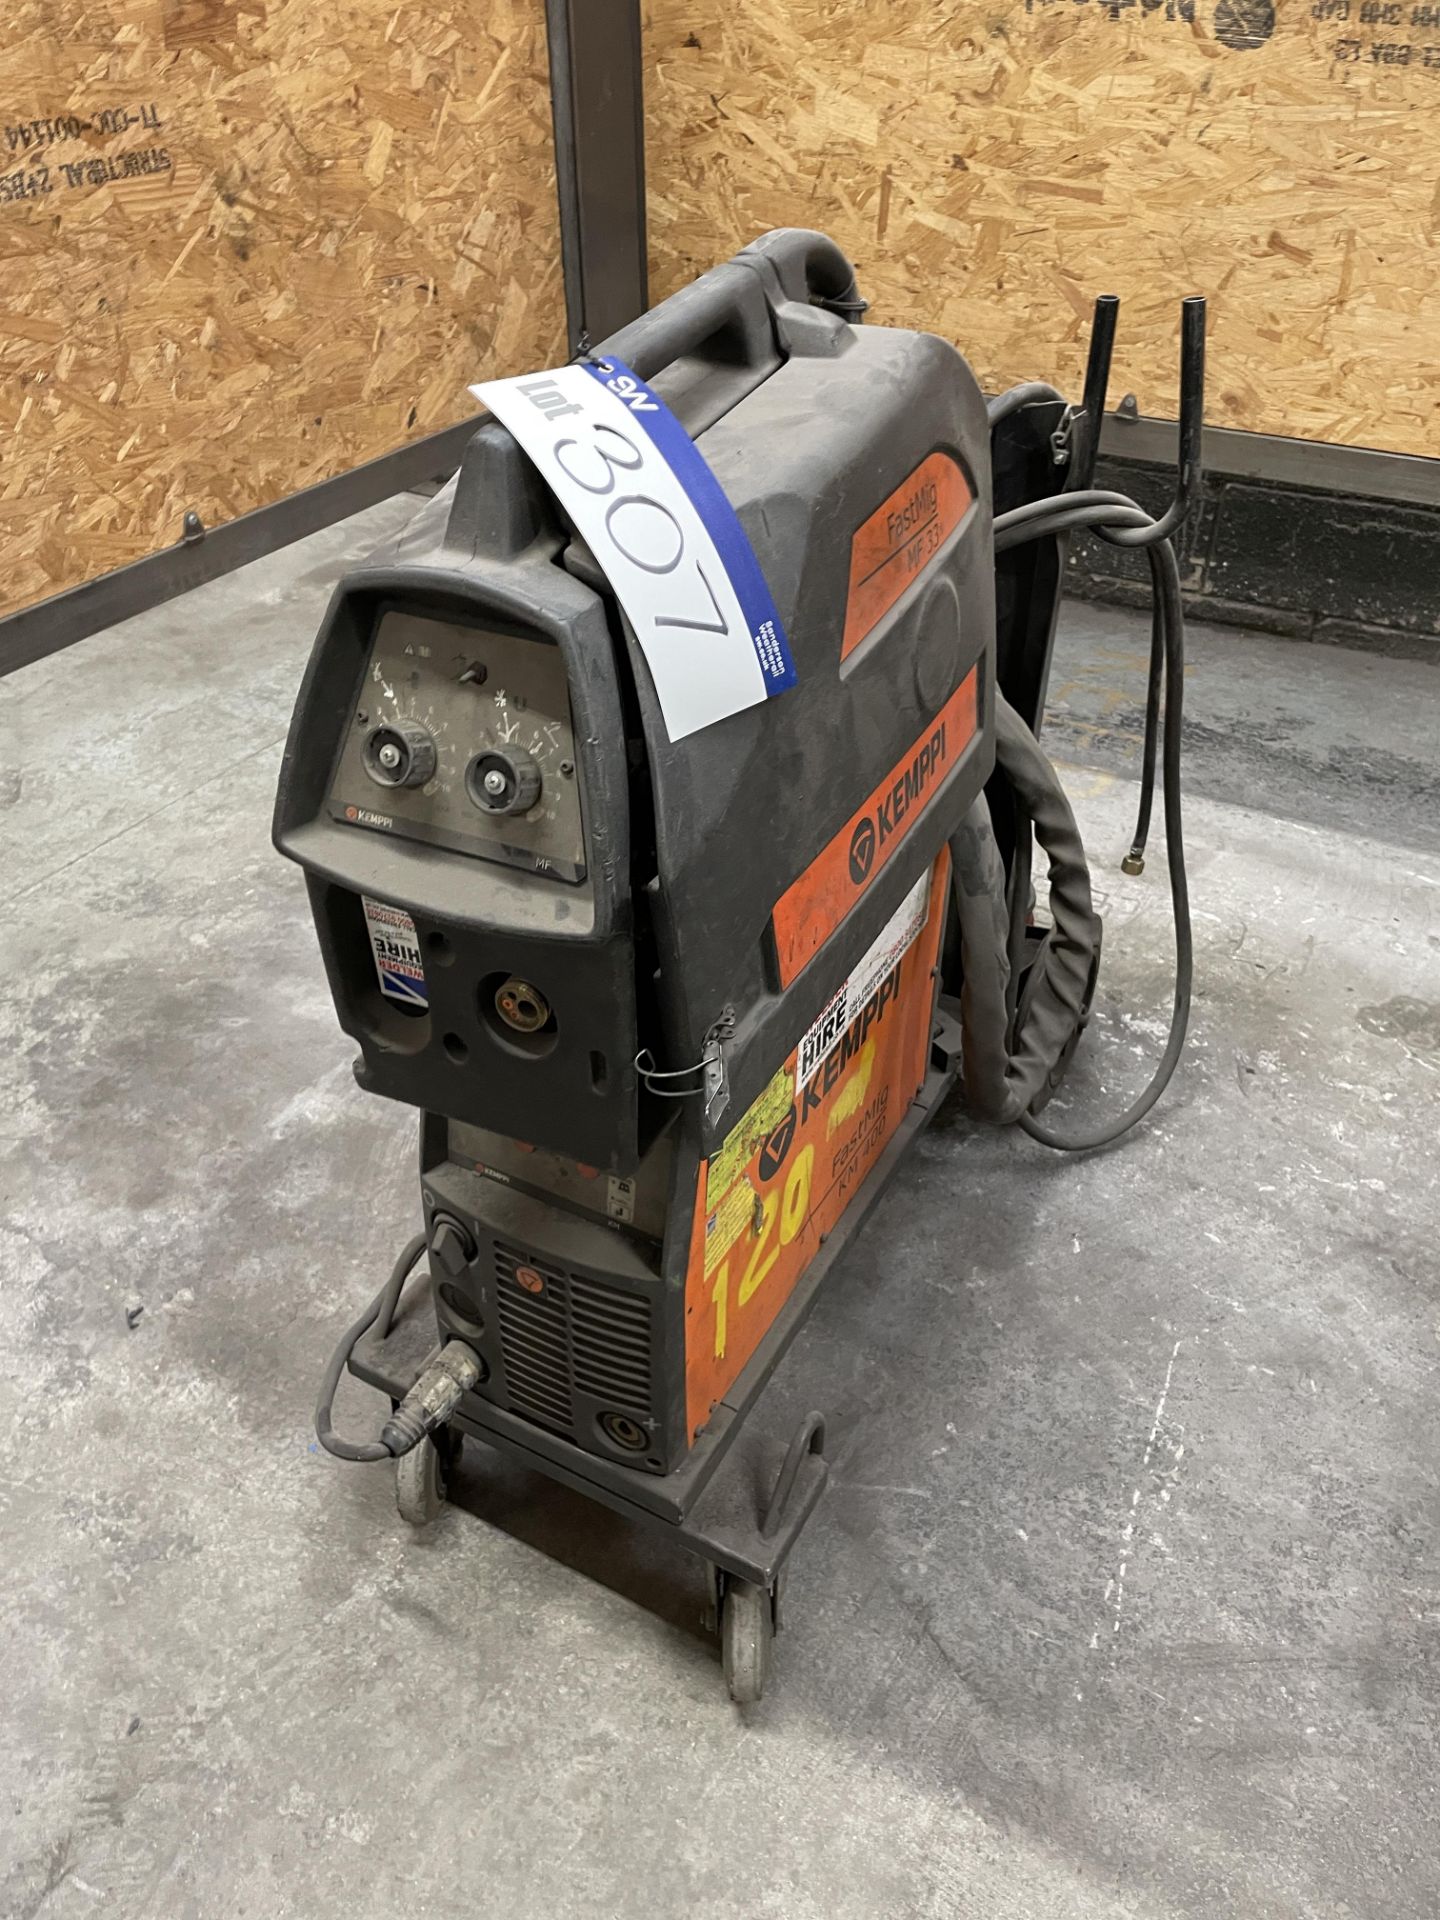 Kemppi Fast Mig KM400 Mig Welder, with Fast Mig MF 33 wire feed unit, 440V Please read the following